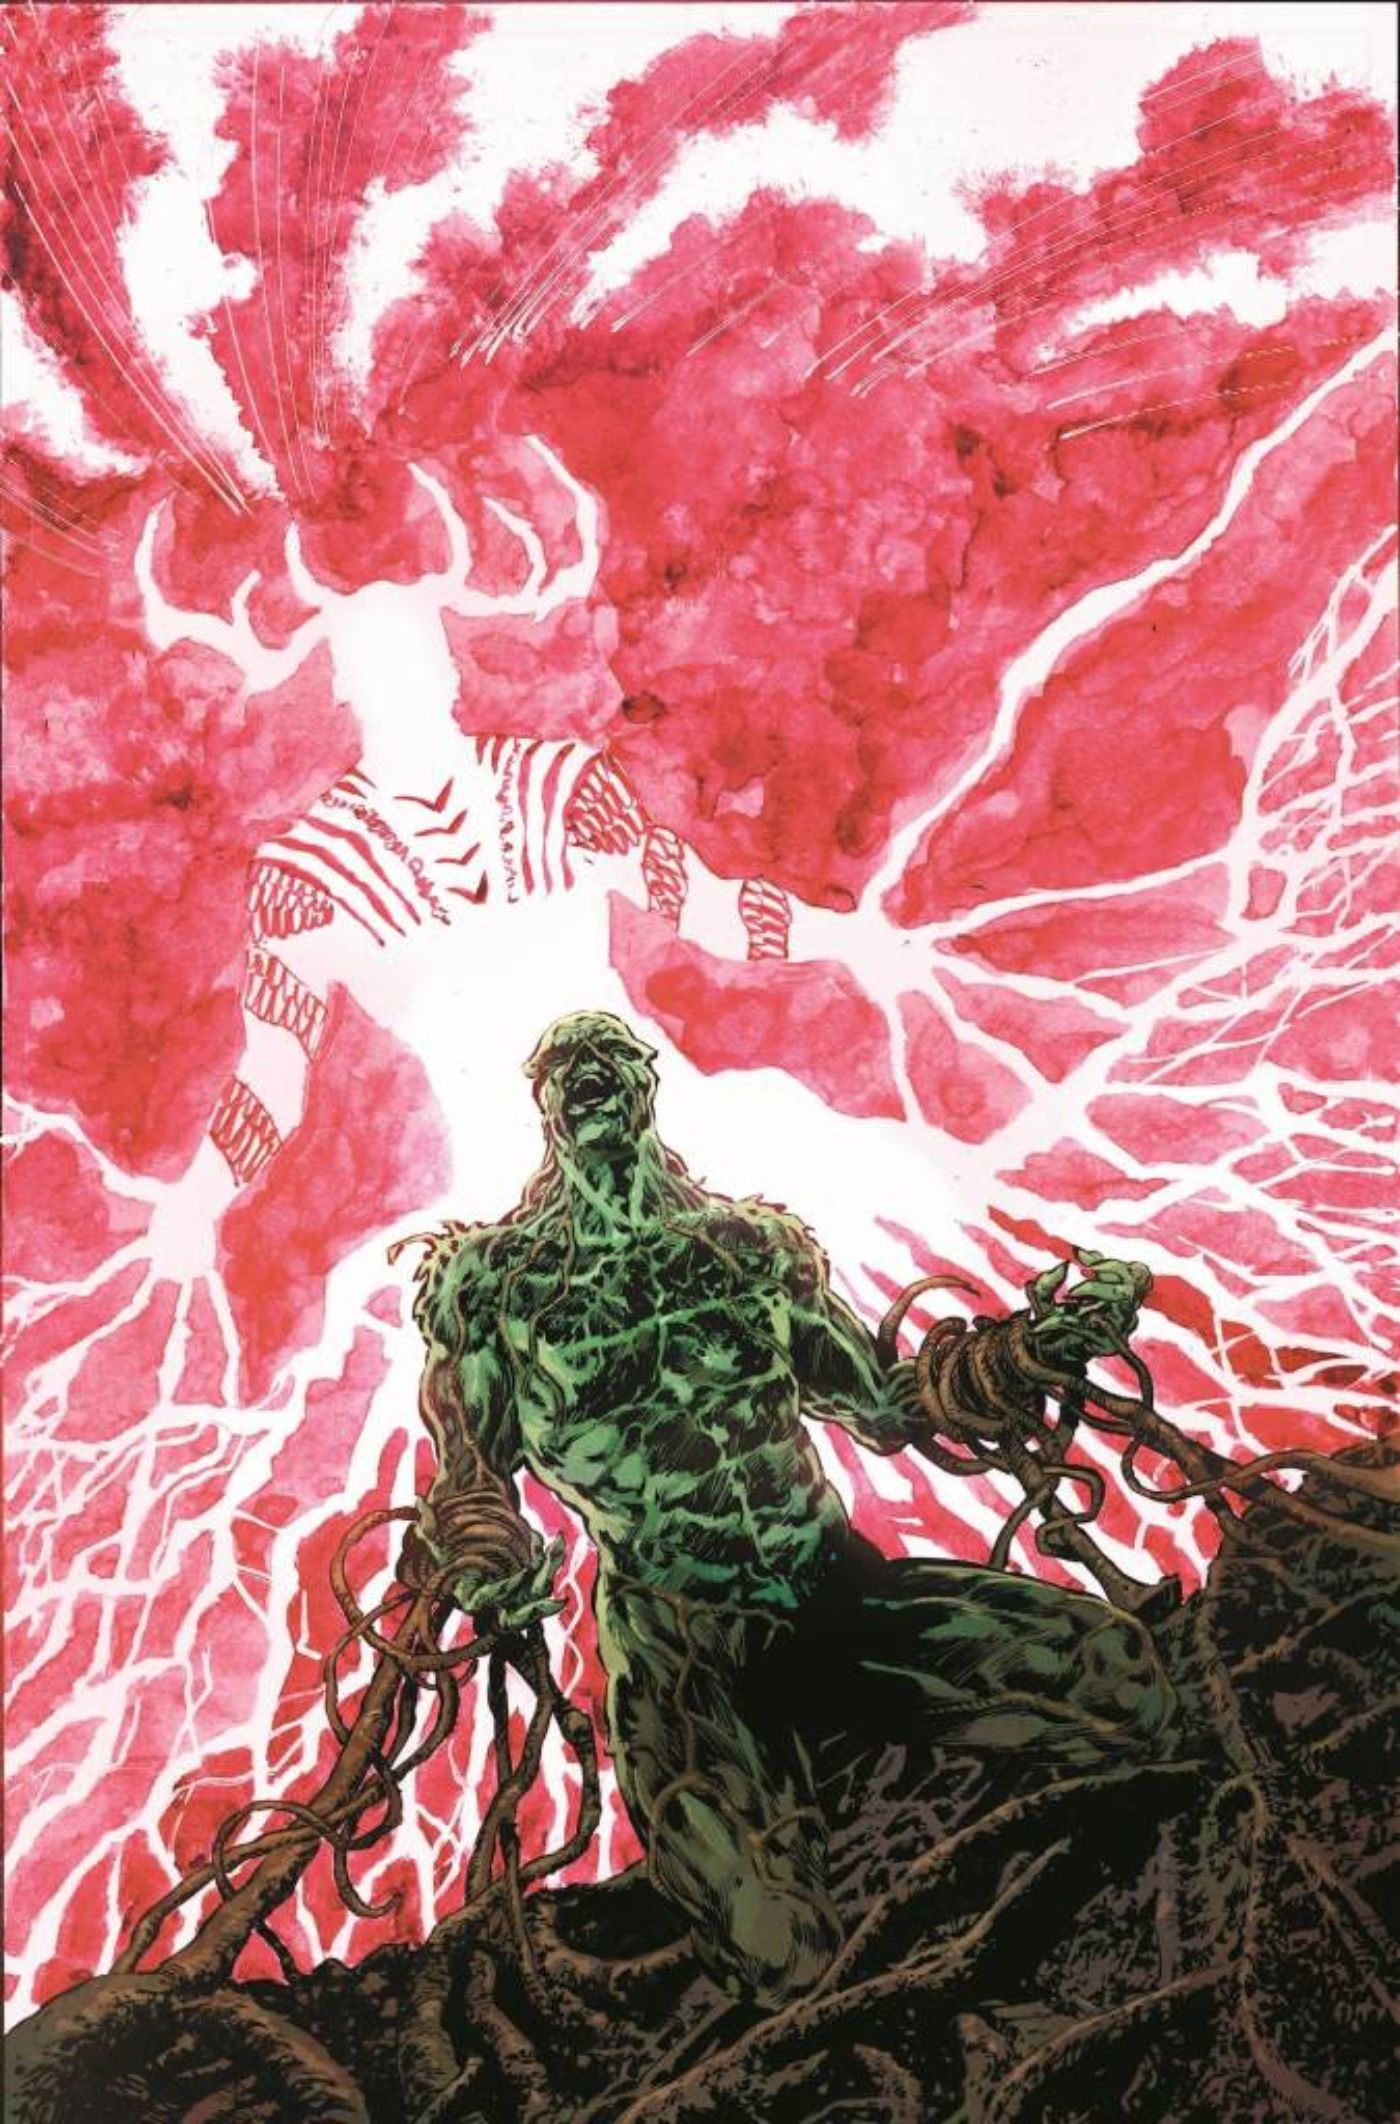 The New Swamp Thing Fights His Brother in Preview